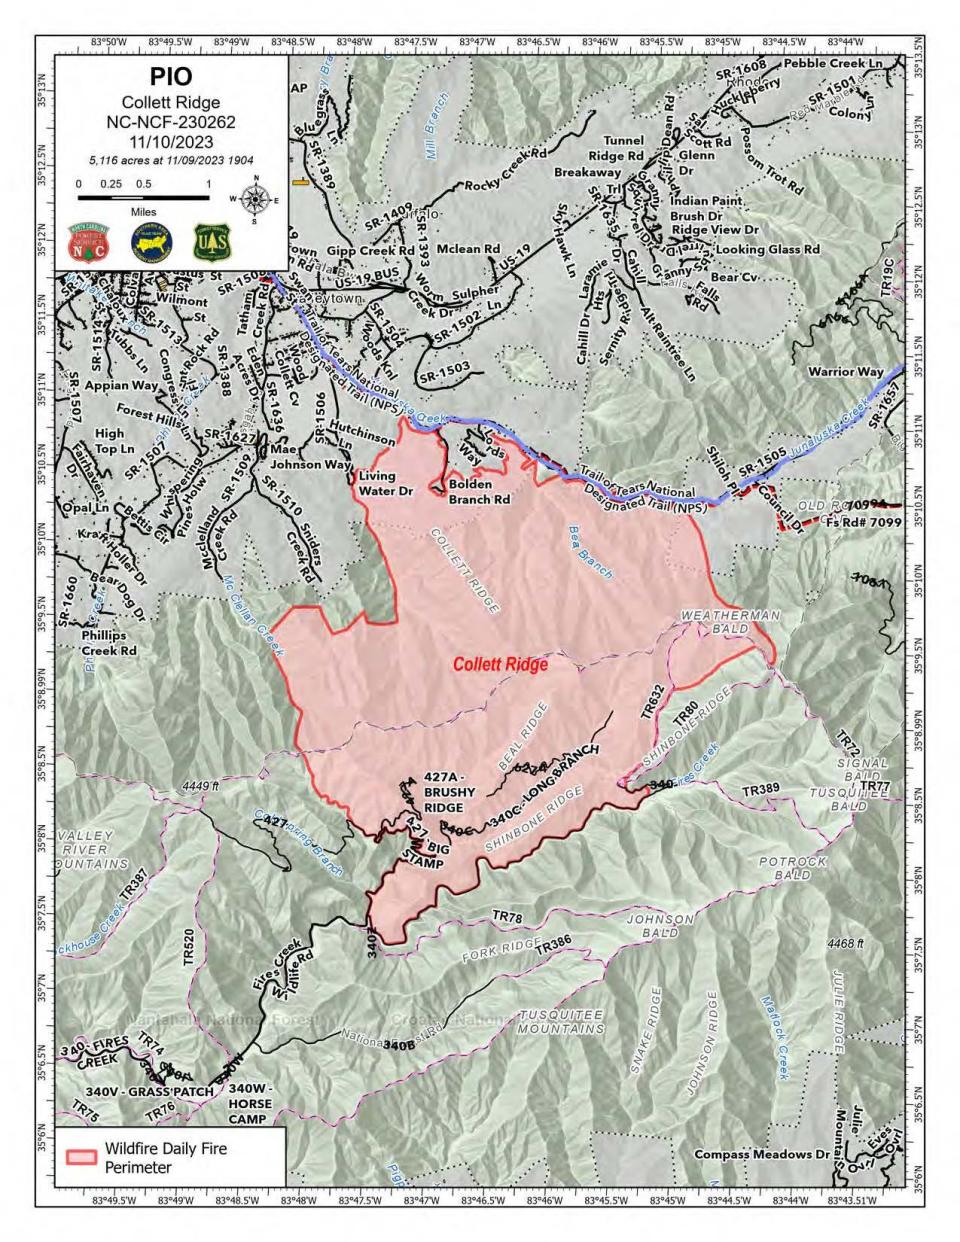 The map depicts the area of a wildfire burning thousands of acres in the Nantahala National Forest.